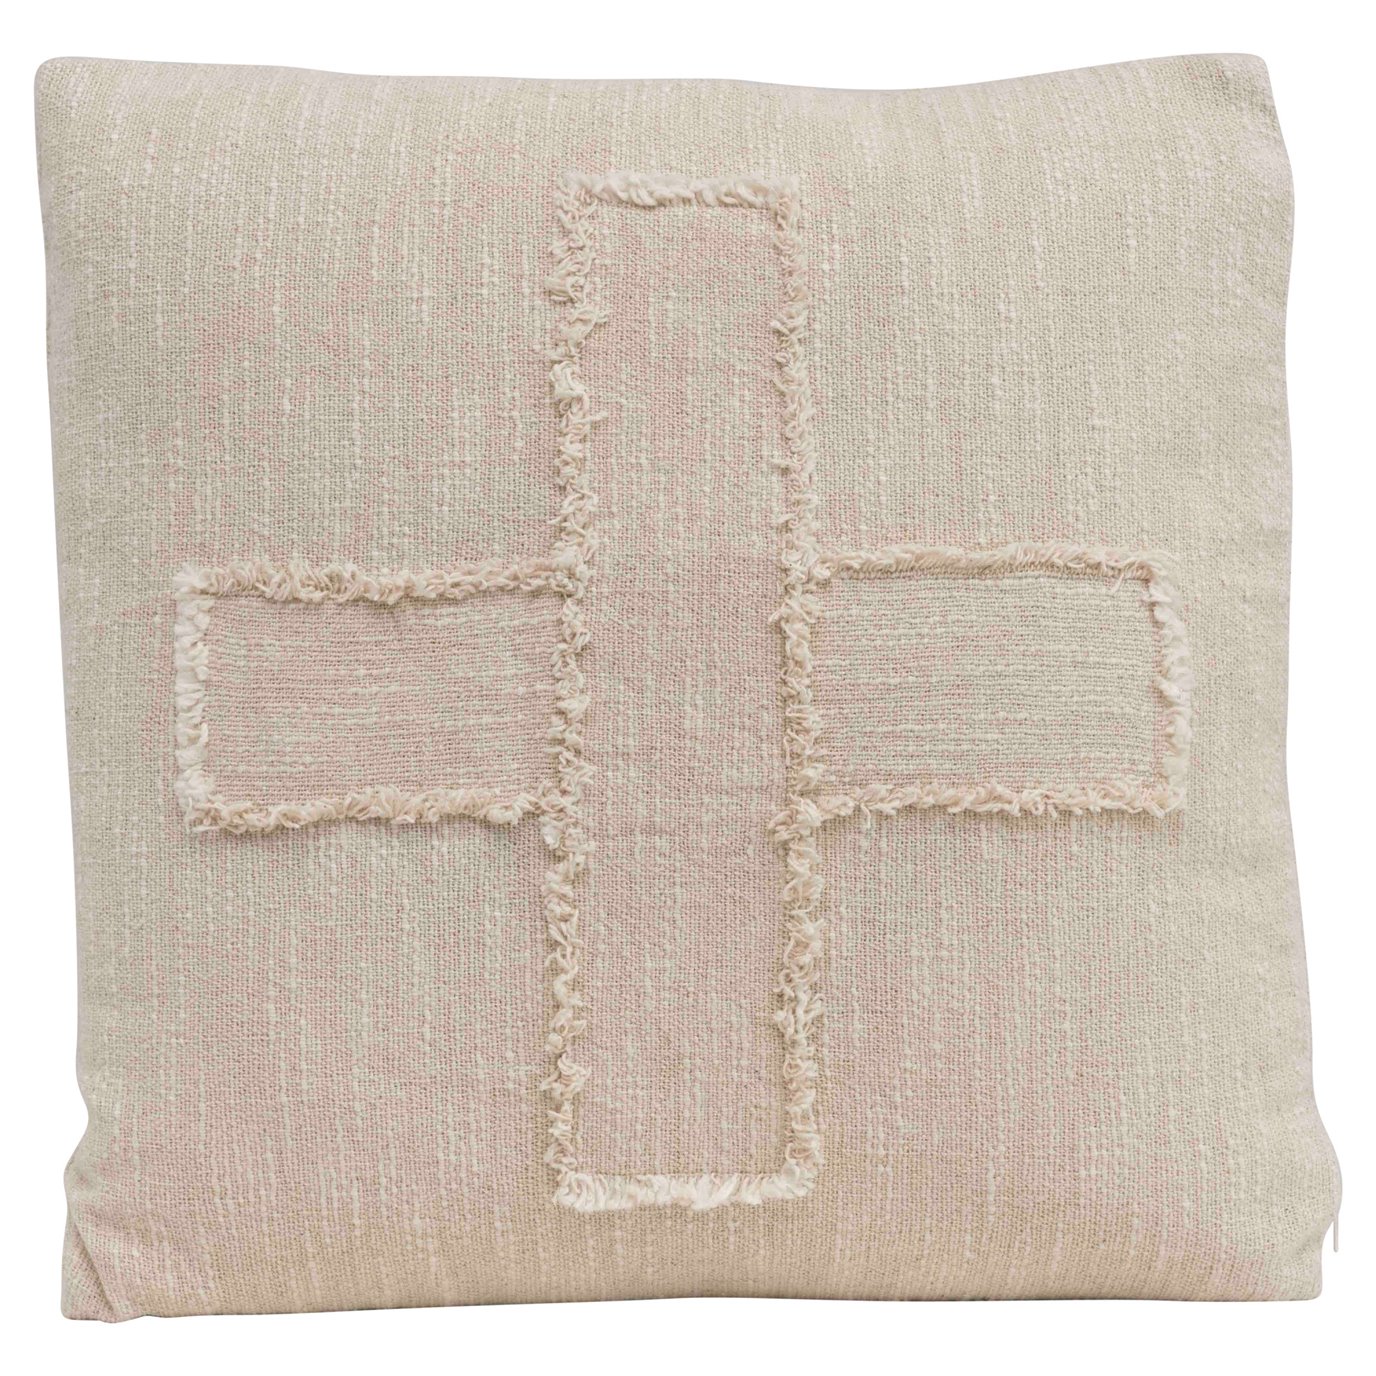 Square Cotton Mudcloth Pillow with Fringed "X" Pattern